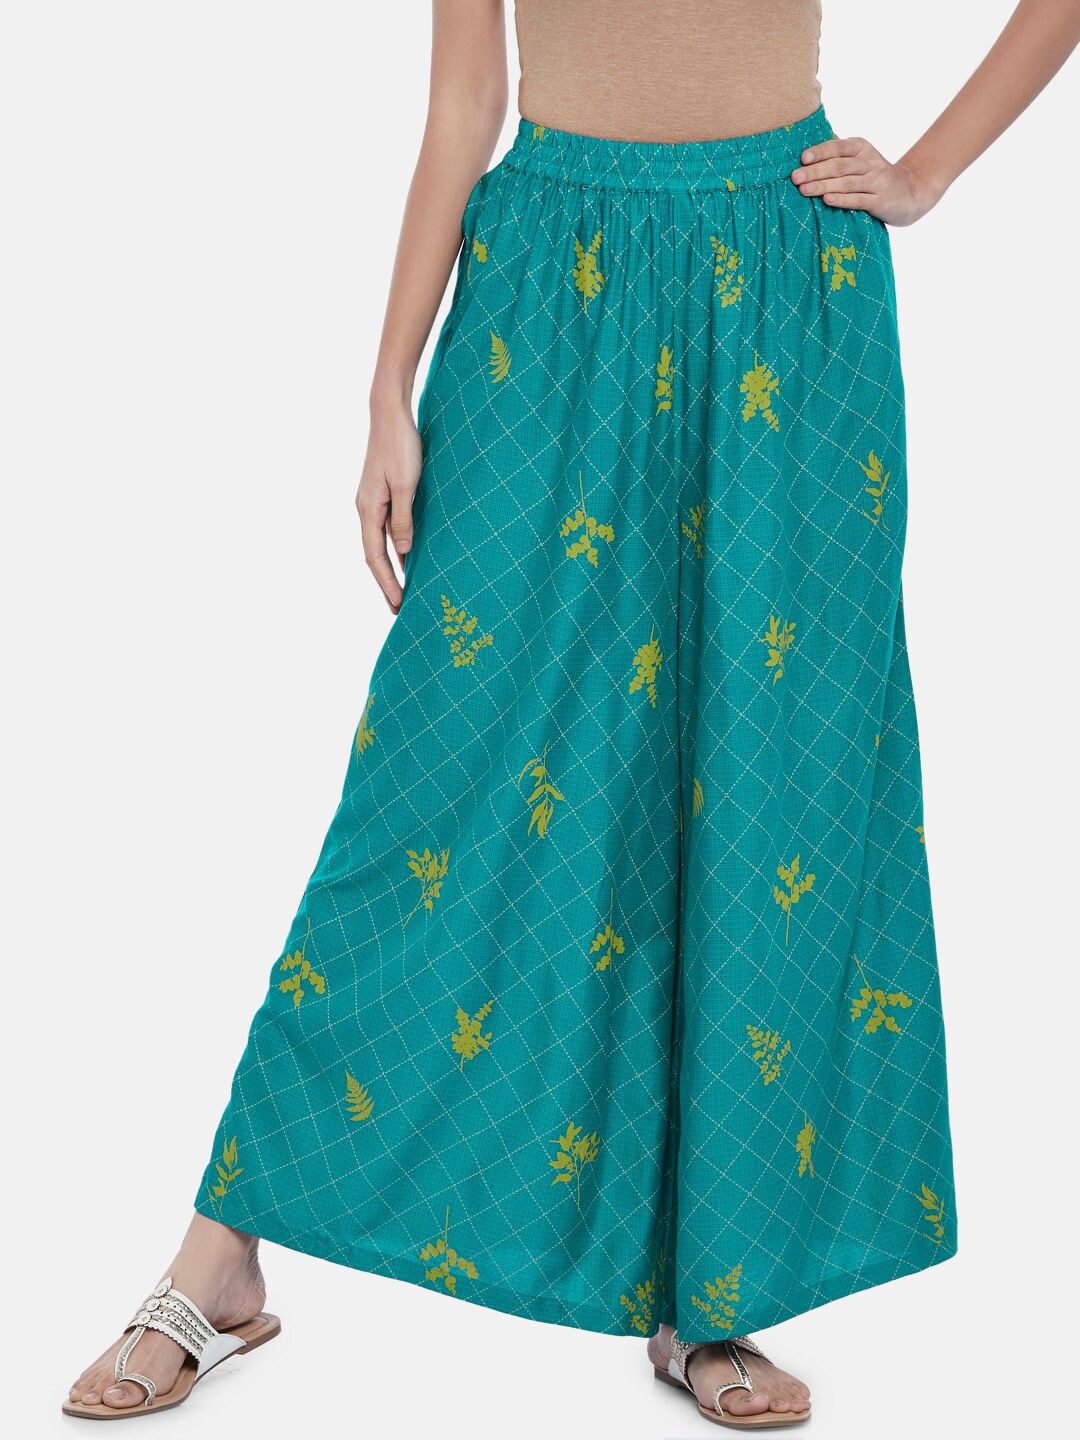 RANGMANCH BY PANTALOONS Women Turquoise Blue & Yellow Floral Printed Ethnic Palazzos Price in India